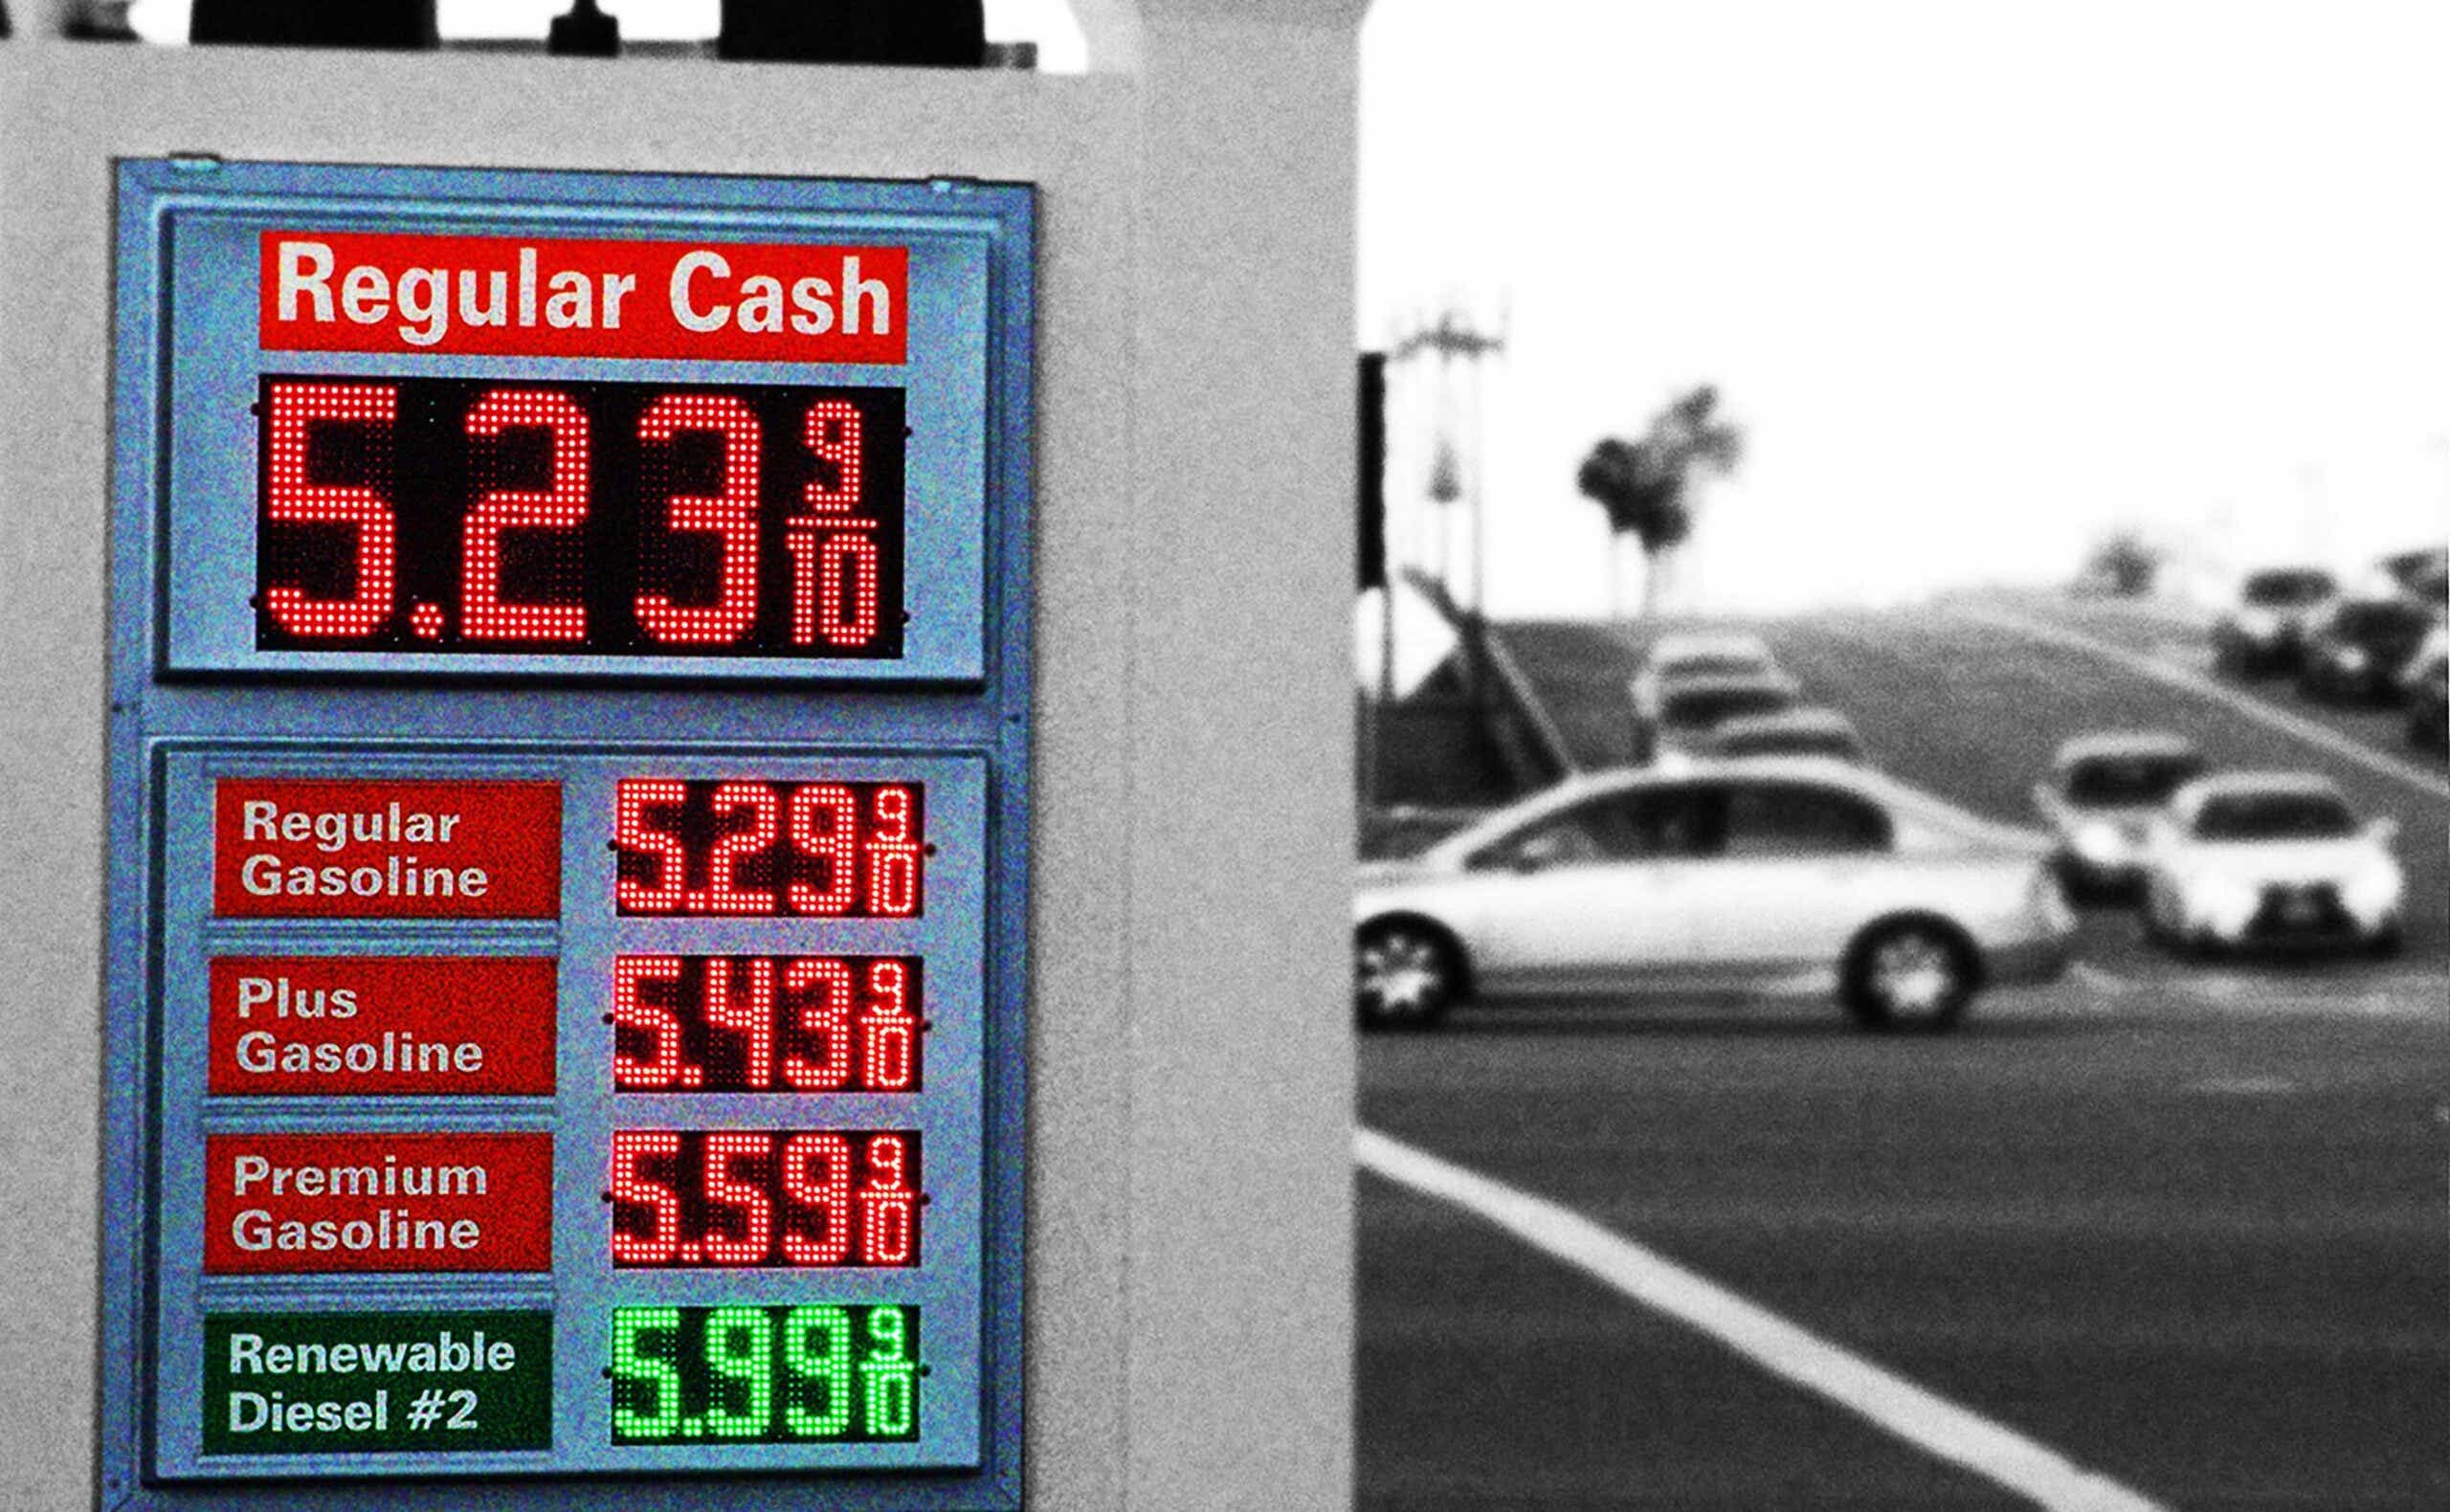 Prices as the gas pump